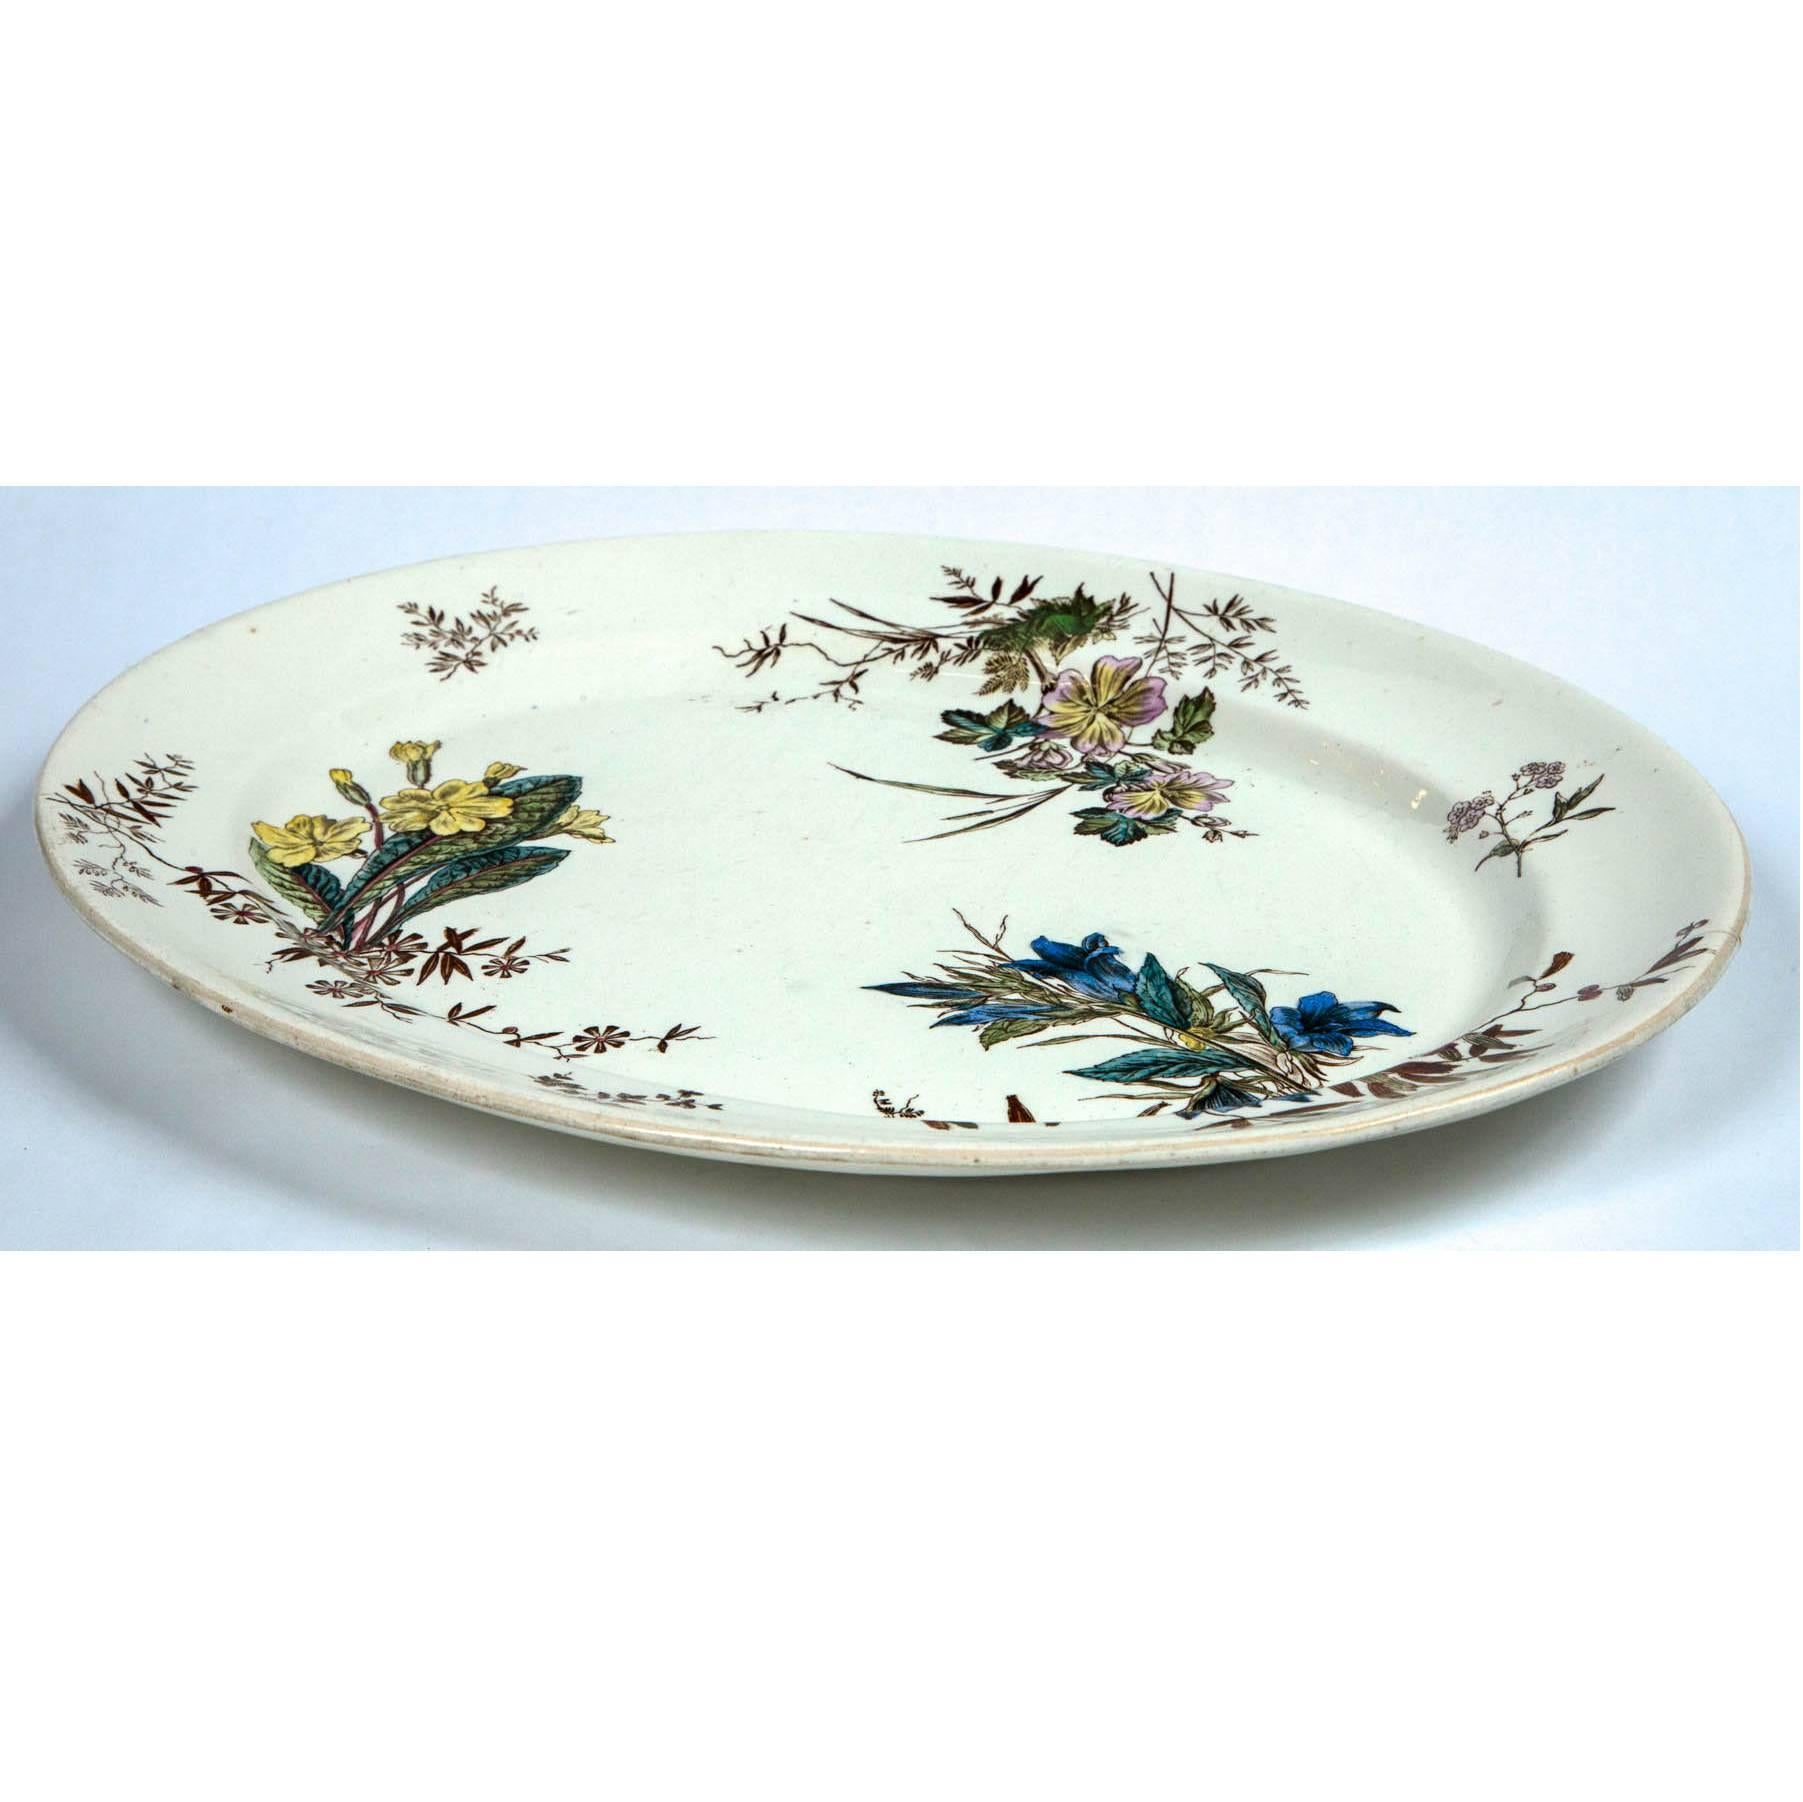 Antique Ceramic Serving Platter, Early 19th Century 2